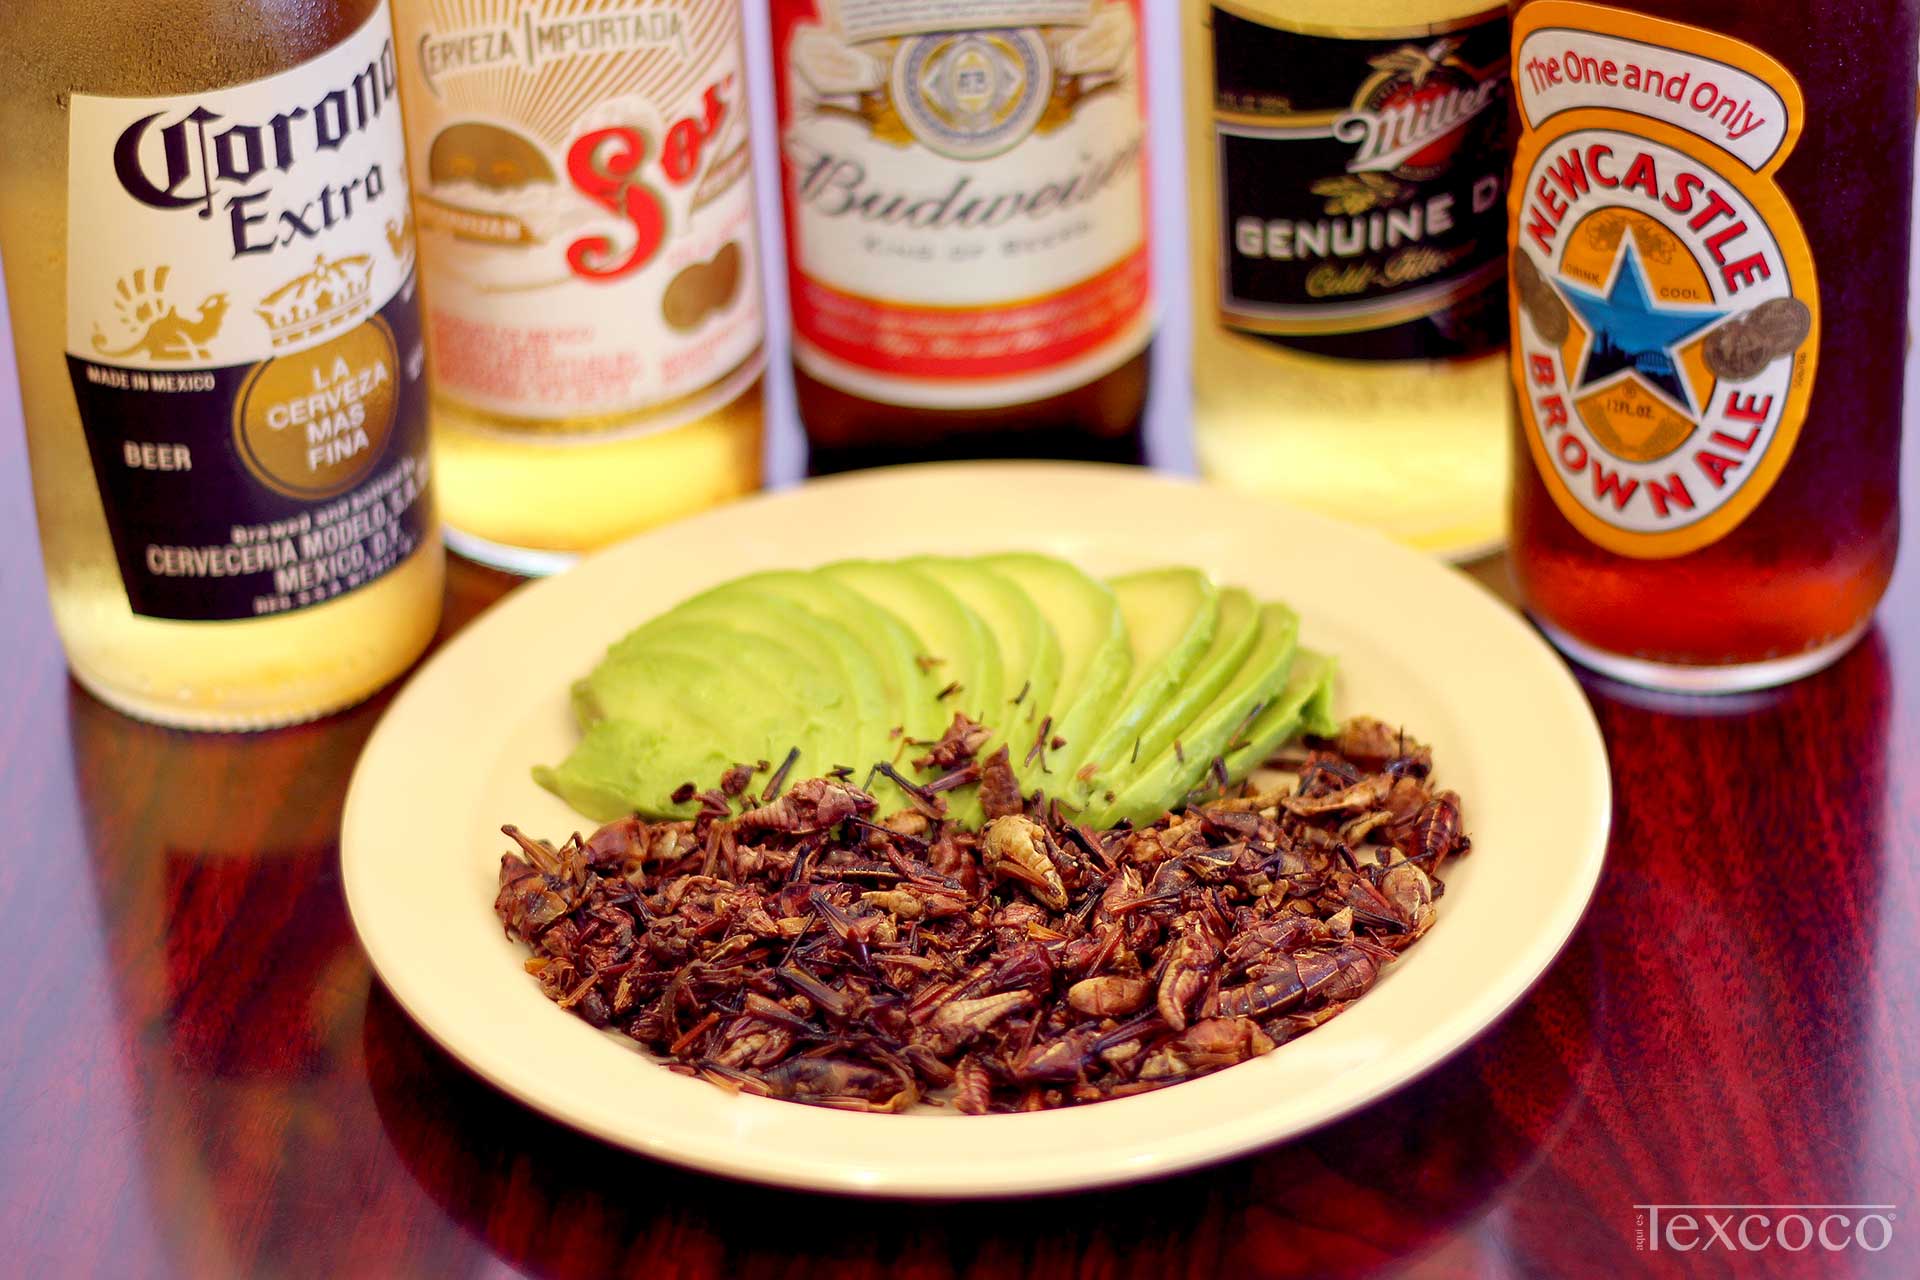 Chapulines, Avocado, and Beer